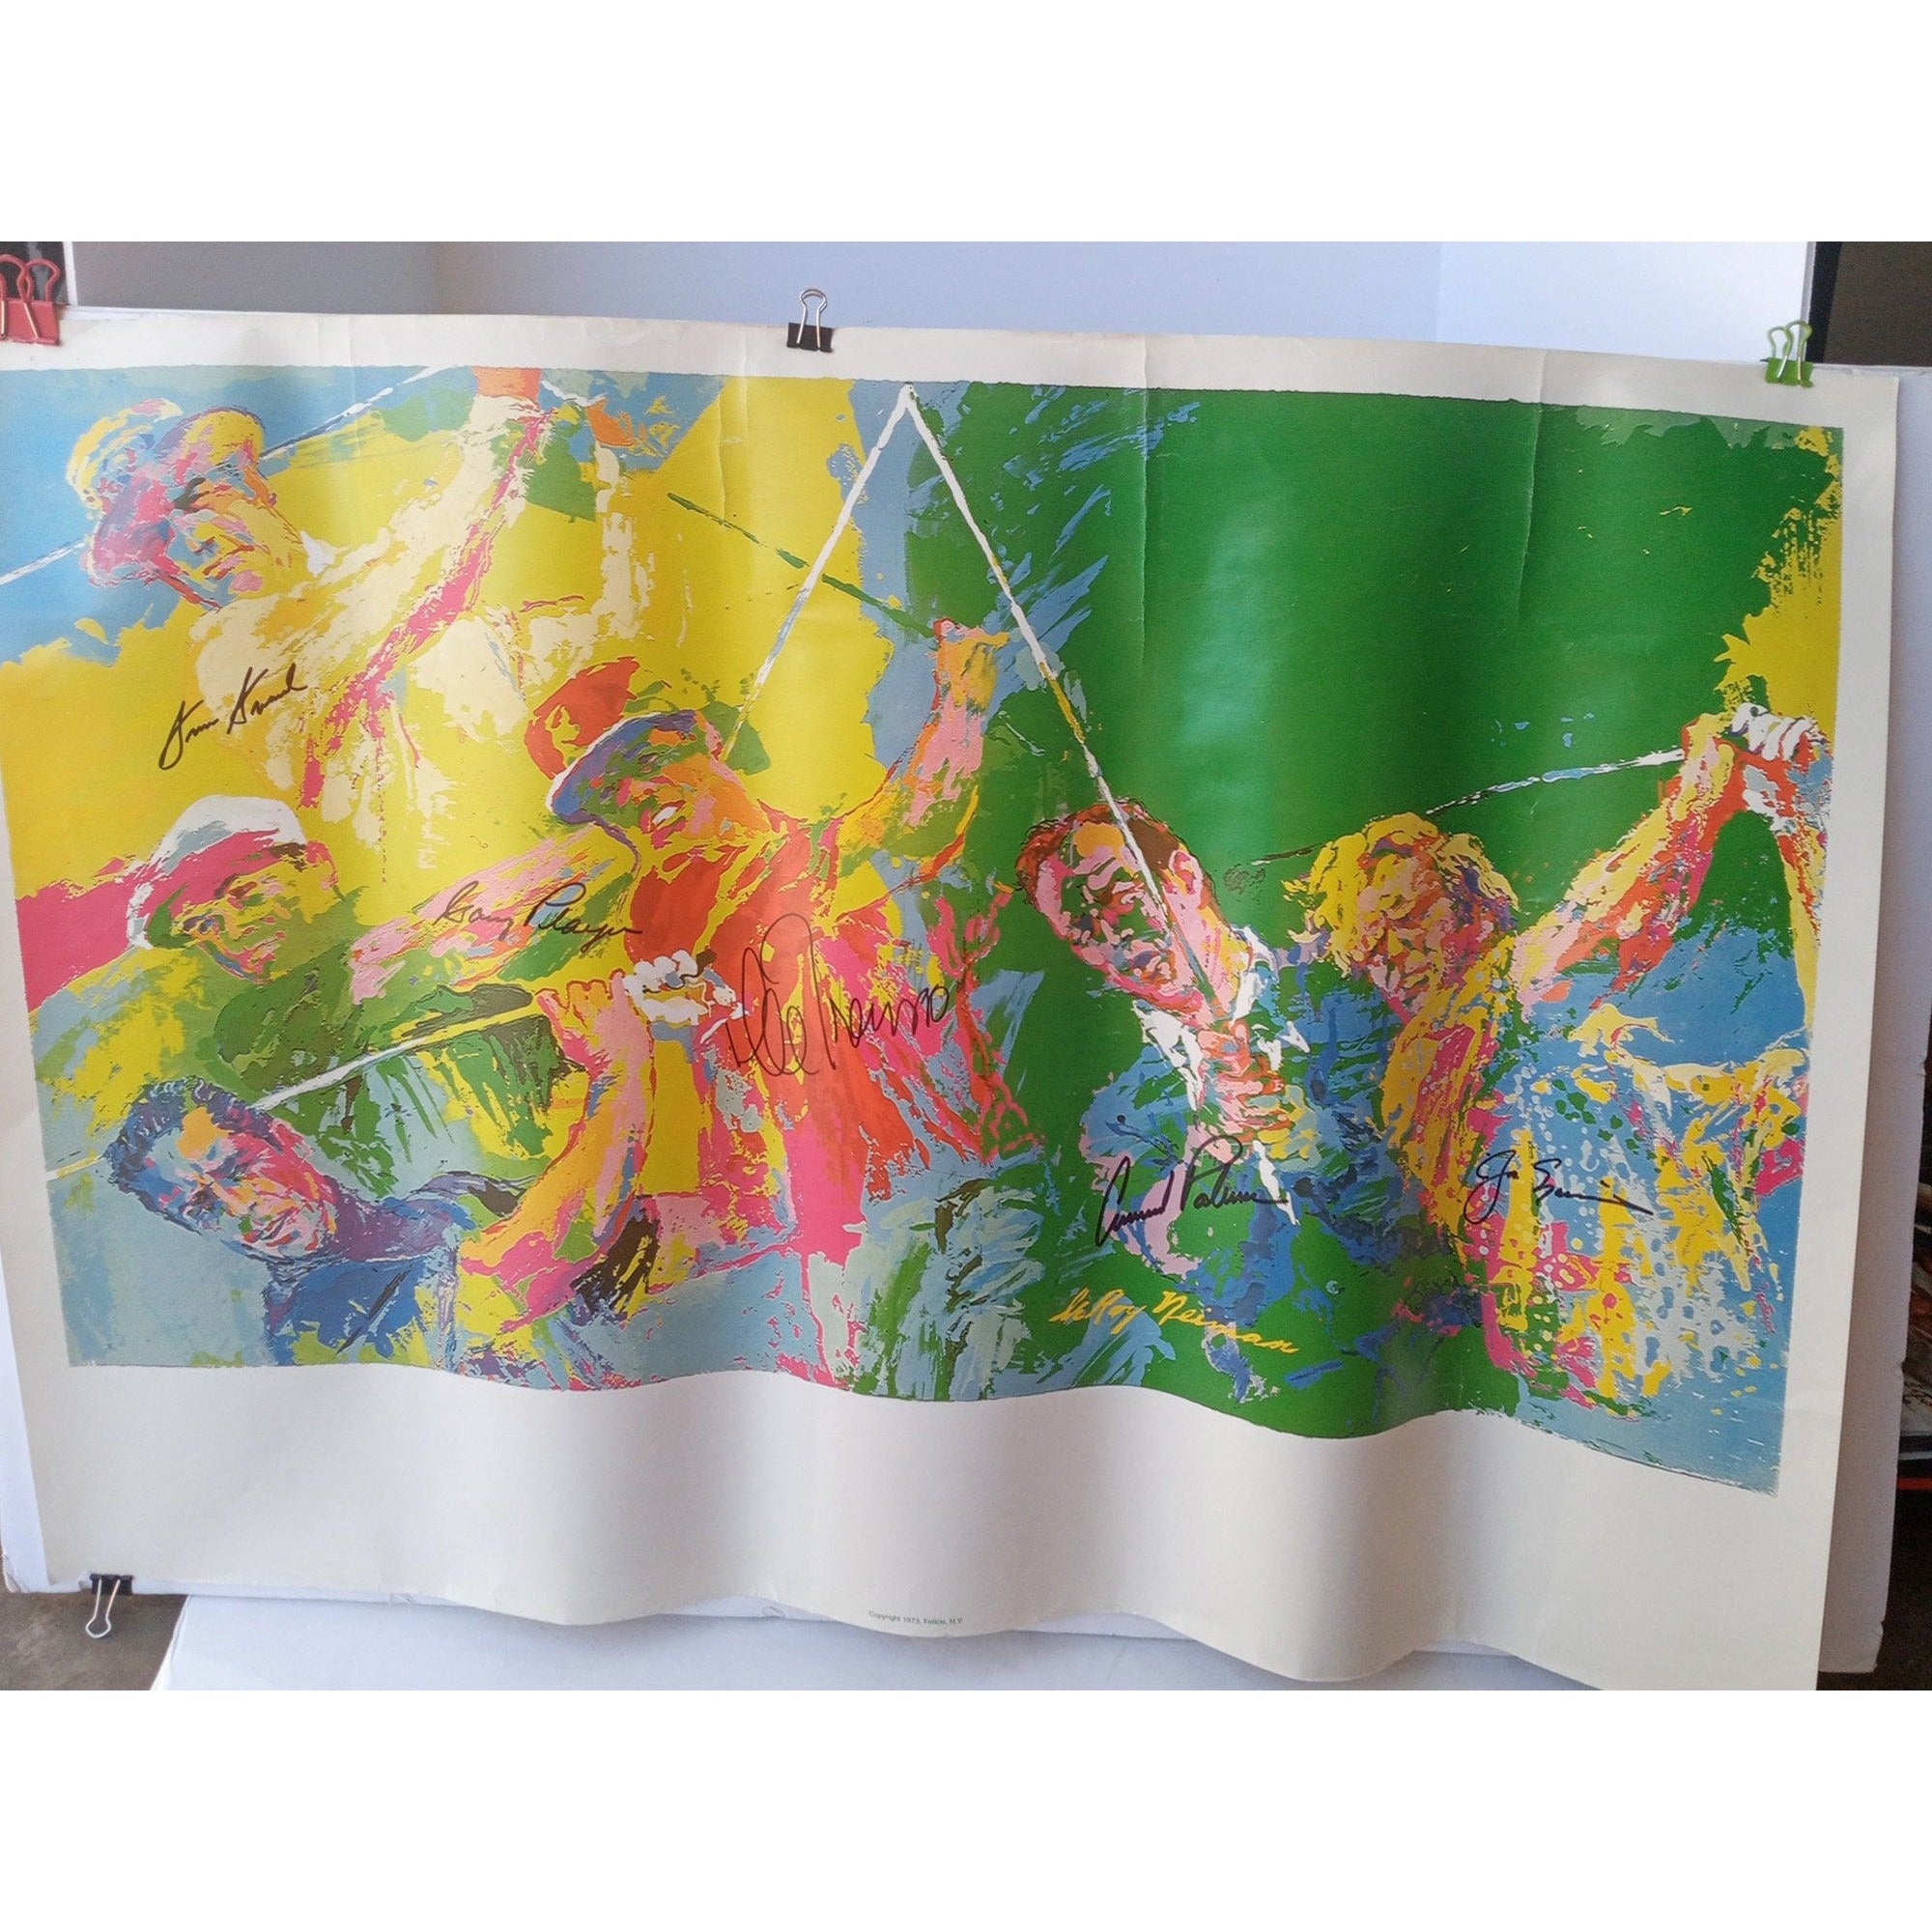 Jack Nicklaus, Arnold Palmer, Lee Trevino, Gary Player, Sam Snead, LeRoy Neiman signed print with proof